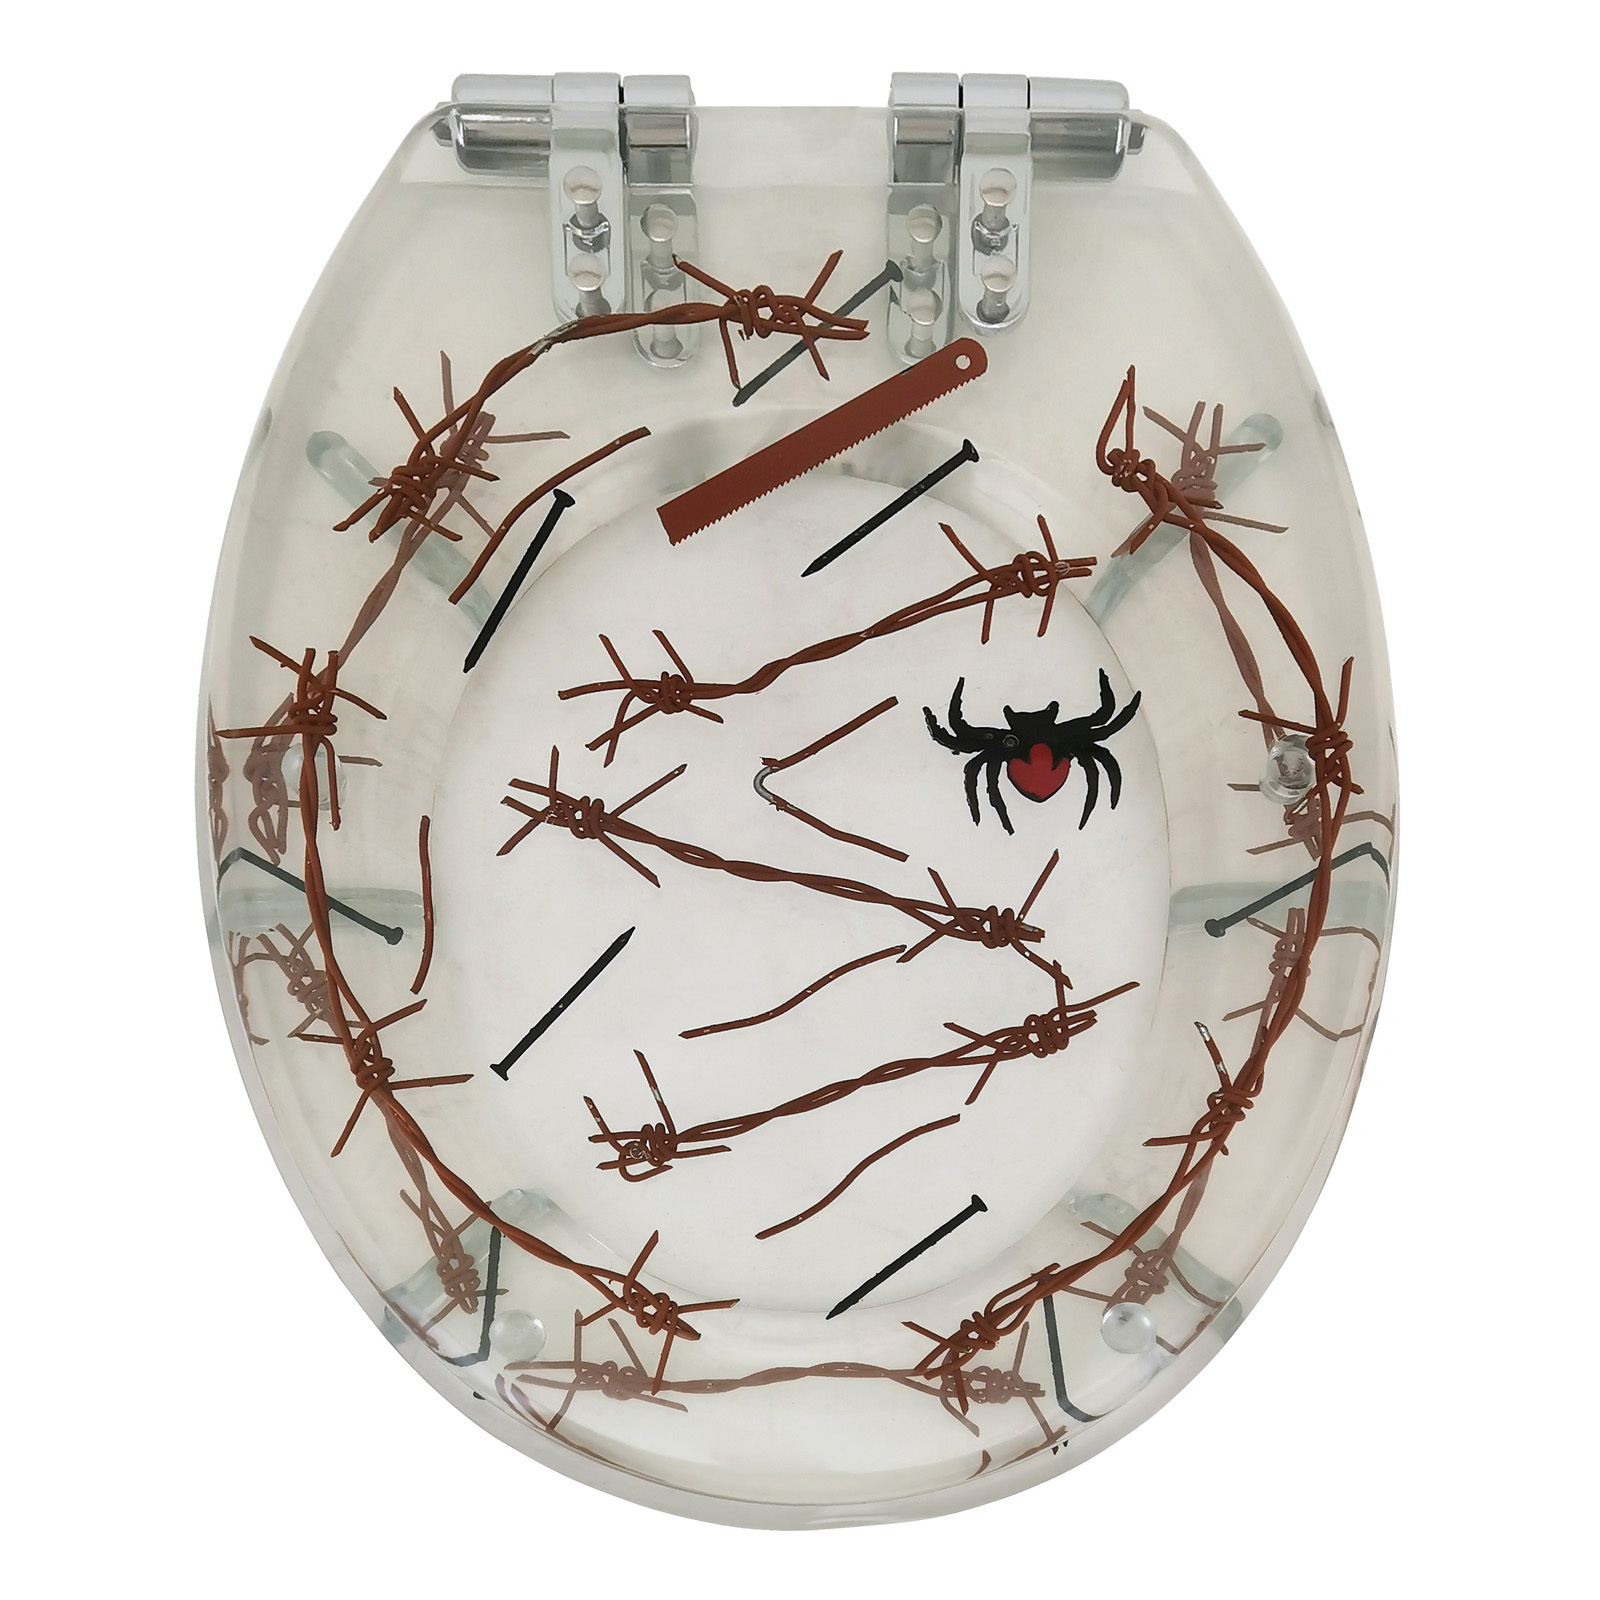 Barbed Wire Toilet Seat Cheapest Clearance, Save 66% | jlcatj.gob.mx